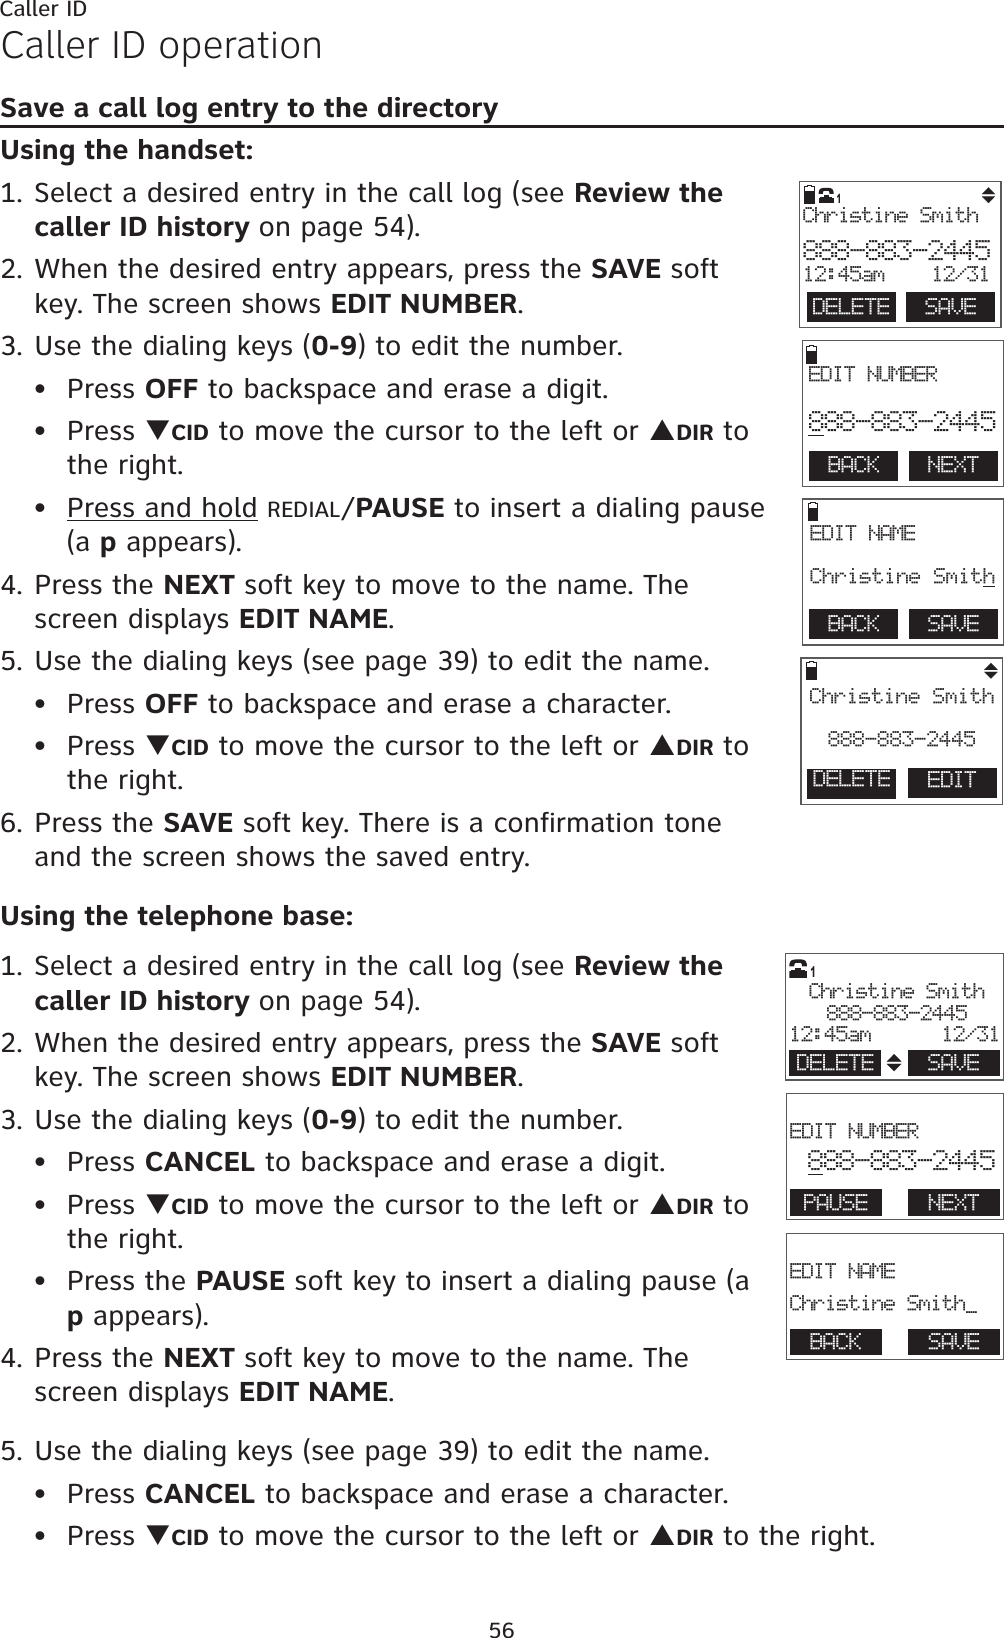 56Caller IDCaller ID operationSave a call log entry to the directoryUsing the handset:1. Select a desired entry in the call log (see Review the caller ID history on page 54).2. When the desired entry appears, press the SAVE soft key. The screen shows EDIT NUMBER.3. Use the dialing keys (0-9) to edit the number.Press OFF to backspace and erase a digit.Press TCID to move the cursor to the left or SDIR to the right.Press and hold REDIAL/PAUSE to insert a dialing pause (a p appears).4. Press the NEXT soft key to move to the name. The screen displays EDIT NAME.5. Use the dialing keys (see page 39) to edit the name.Press OFF to backspace and erase a character.Press TCID to move the cursor to the left or SDIR to the right.6. Press the SAVE soft key. There is a confirmation tone and the screen shows the saved entry.Using the telephone base:1. Select a desired entry in the call log (see Review the caller ID history on page 54).2. When the desired entry appears, press the SAVE softkey. The screen shows EDIT NUMBER.3. Use the dialing keys (0-9) to edit the number.Press CANCEL to backspace and erase a digit.Press TCID to move the cursor to the left or SDIR to the right.Press the PAUSE soft key to insert a dialing pause (a p appears).4. Press the NEXT soft key to move to the name. The screen displays EDIT NAME.5. Use the dialing keys (see page 39) to edit the name.Press CANCEL to backspace and erase a character.Press TCID to move the cursor to the left or SDIR to the right.••••••••••BACK    NEXT EDIT NUMBER888-883-2445BACK    SAVE EDIT NAME Christine SmithEDITChristine Smith888-883-2445  DELETE  SAVEChristine Smith888-883-244512:45am 12/311DELETE                        EDIT NUMBER888-883-2445PAUSE NEXT                       EDIT NAMEChristine Smith_BACK SAVEChristine Smith888-883-244512:45am      12/31DELETE SAVE1